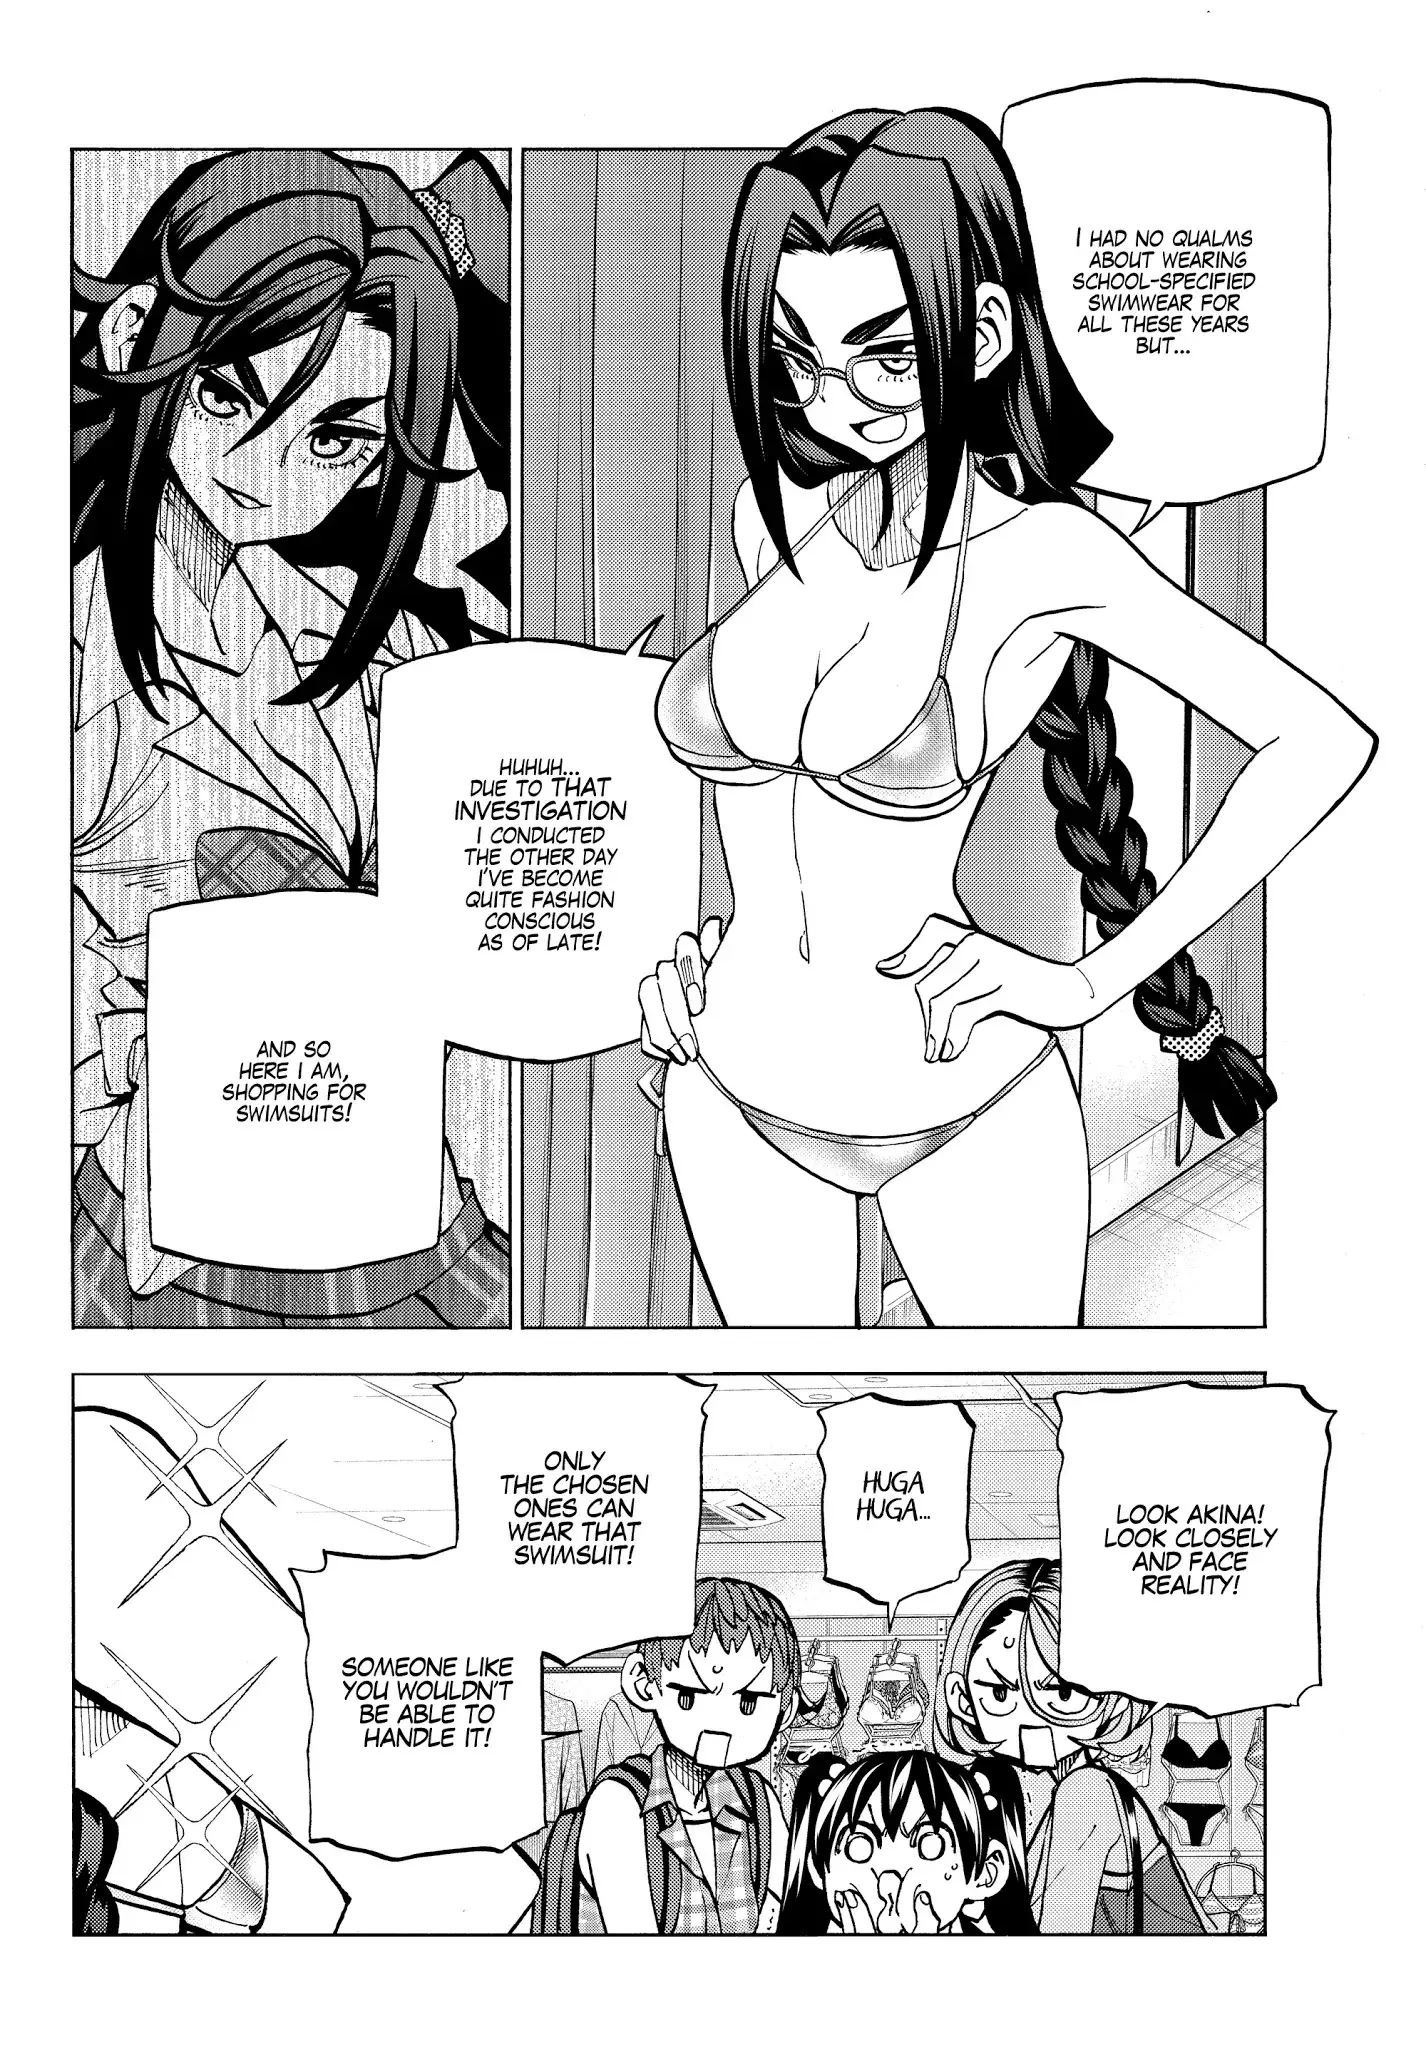 The Story Between A Dumb Prefect And A High School Girl With An Inappropriate Skirt Length - 17 page 11